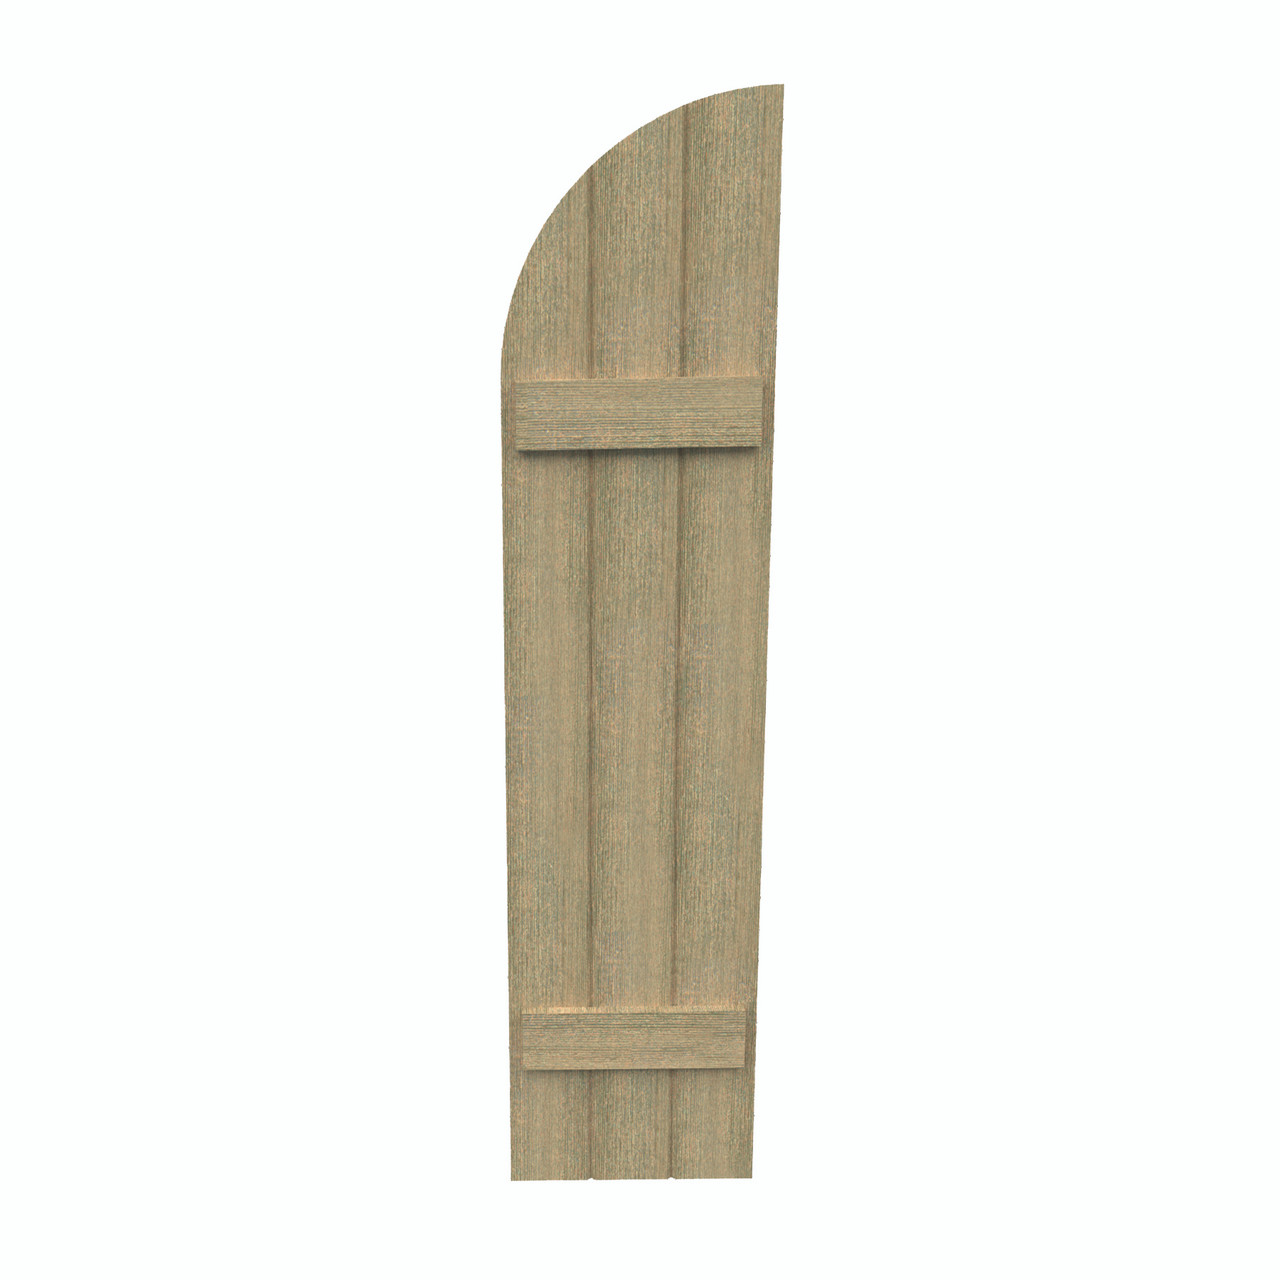 14 inch by 29 inch Quarter Round Shutter with 3-Boards